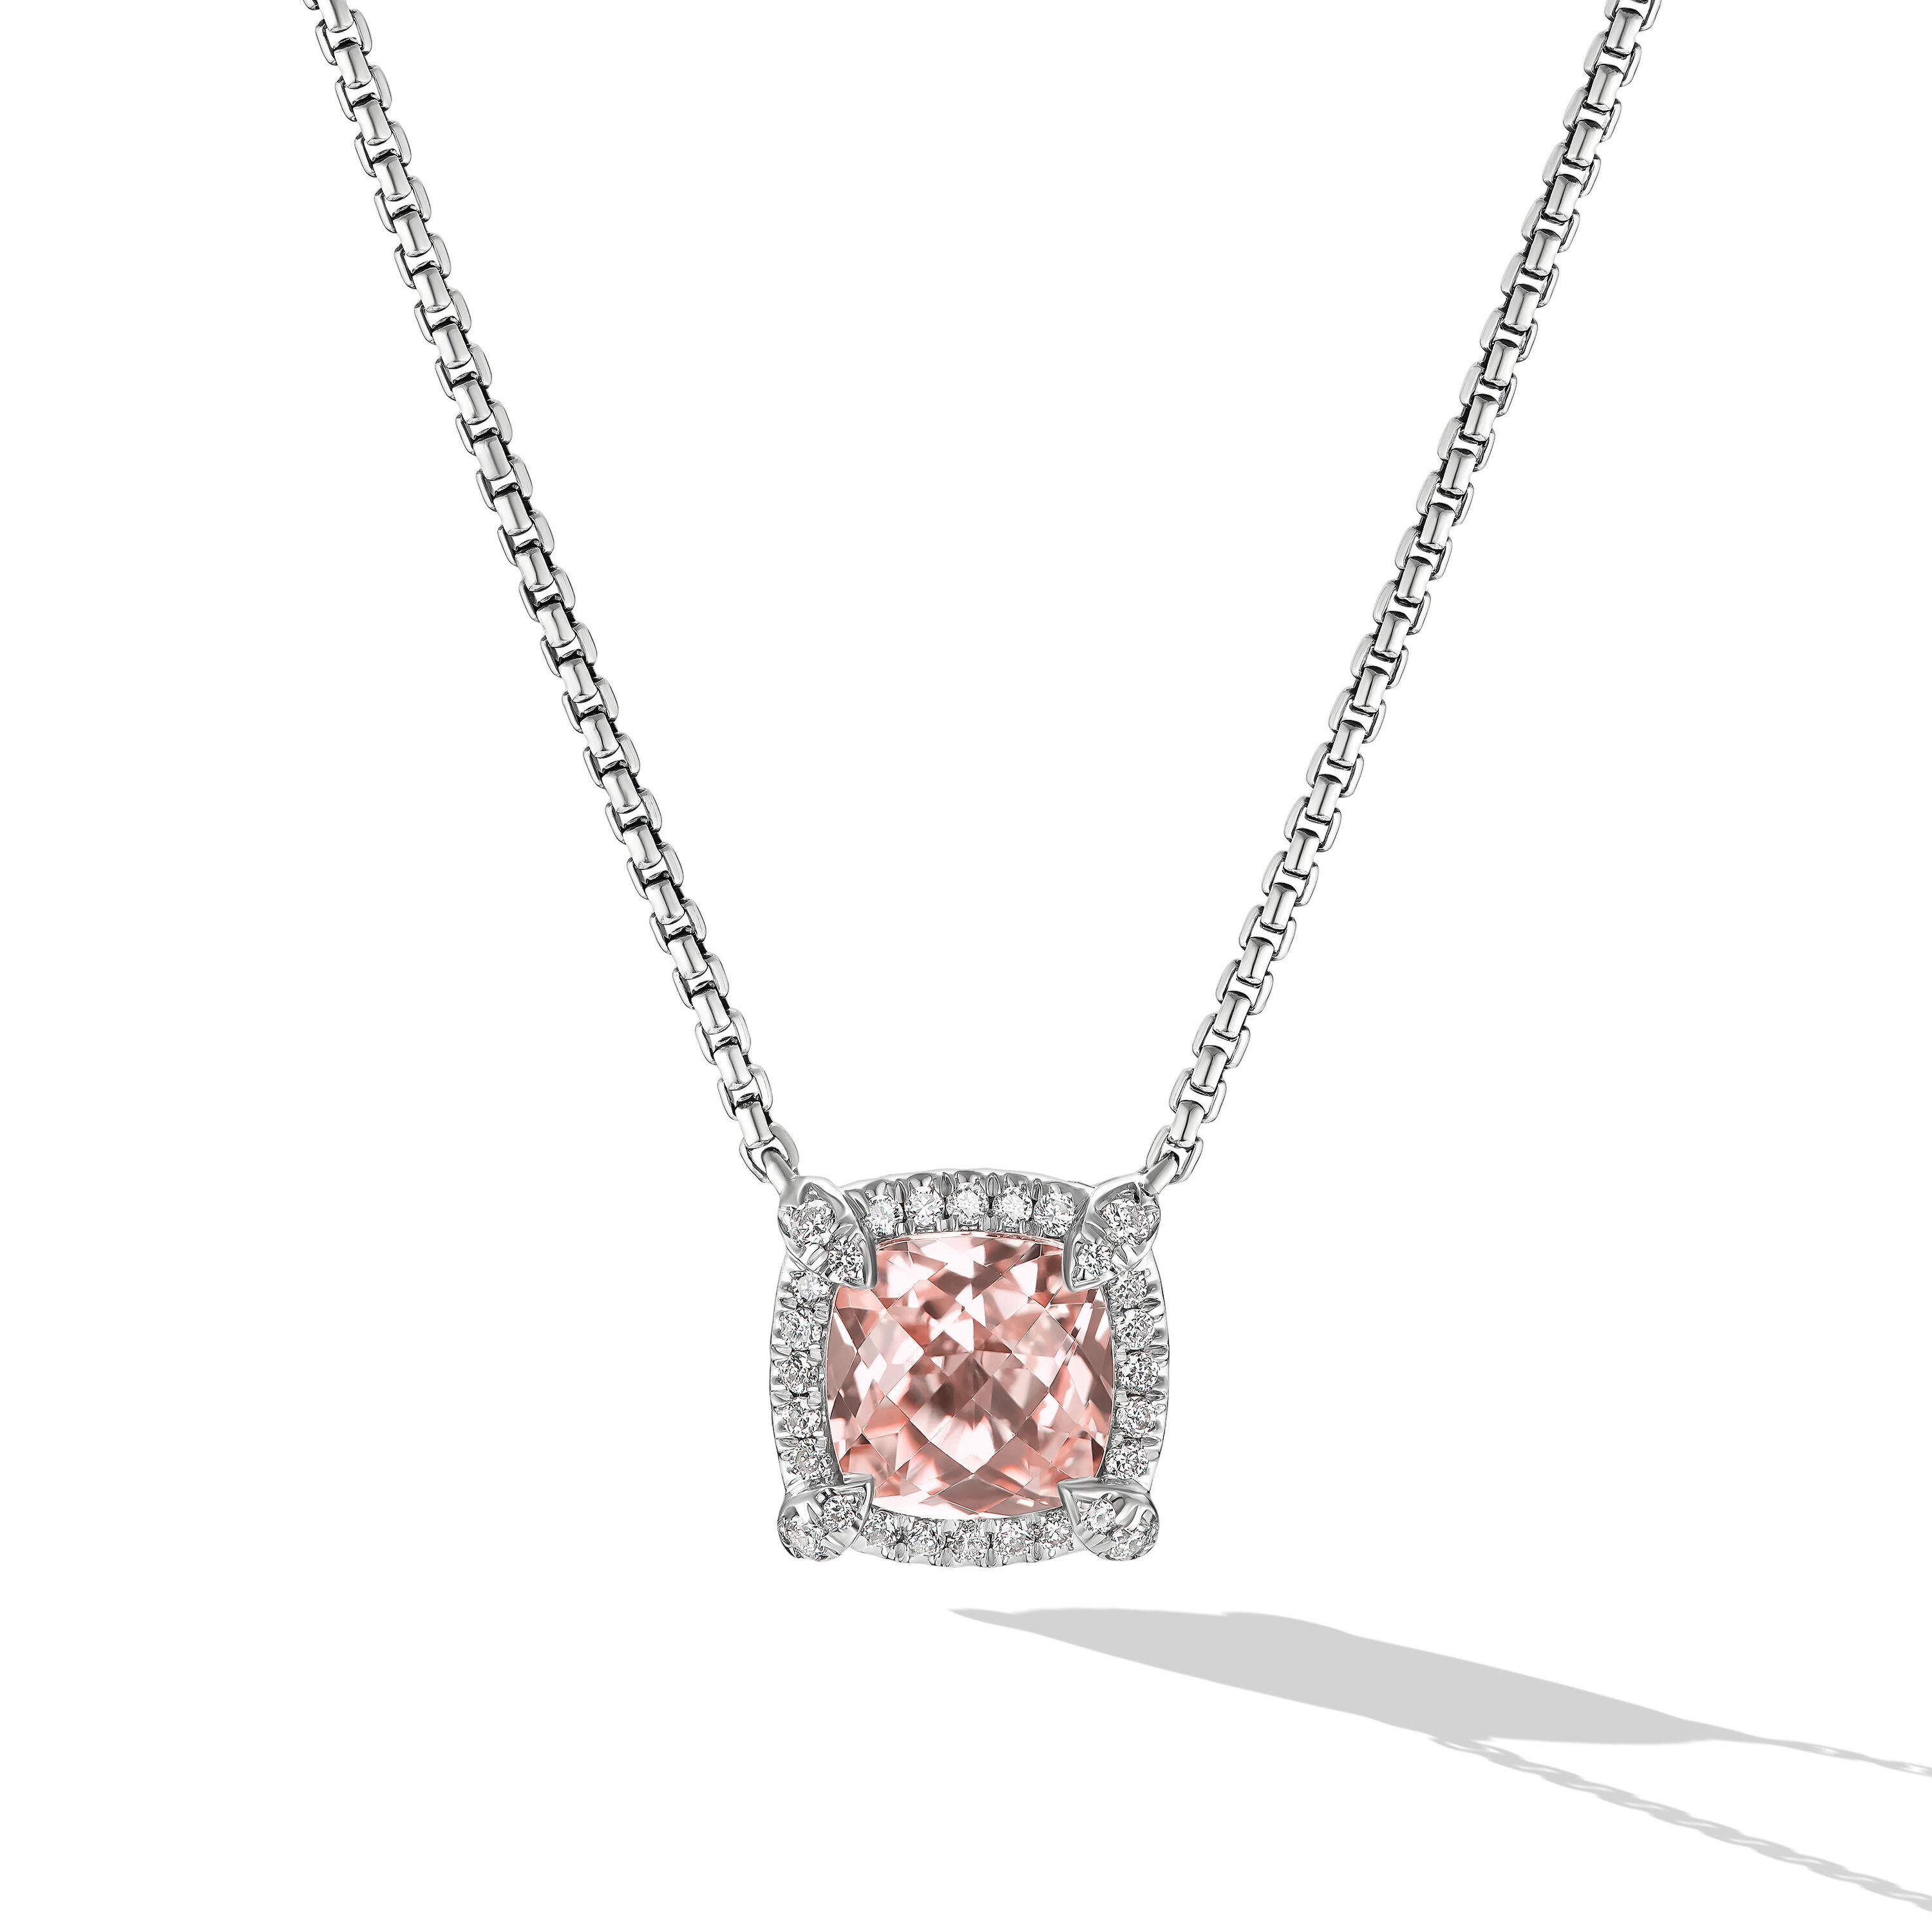 David Yurman Petite Chatelaine Pave Bezel Pendant Necklace in Sterling Silver with Morganite and Diamonds